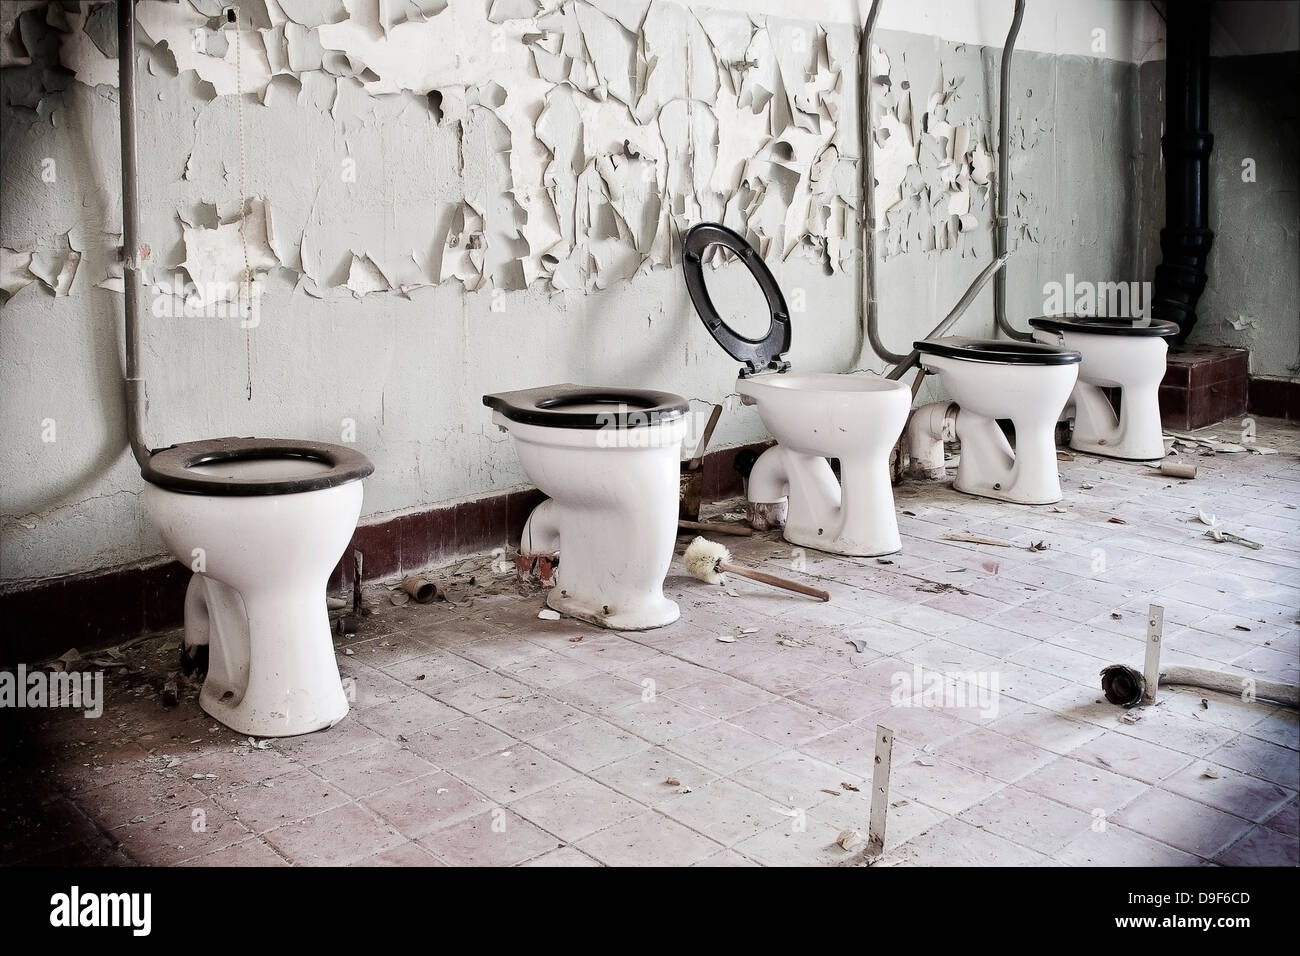 Old toilet washbasins in a row, Old toilet bowl in a row Stock Photo